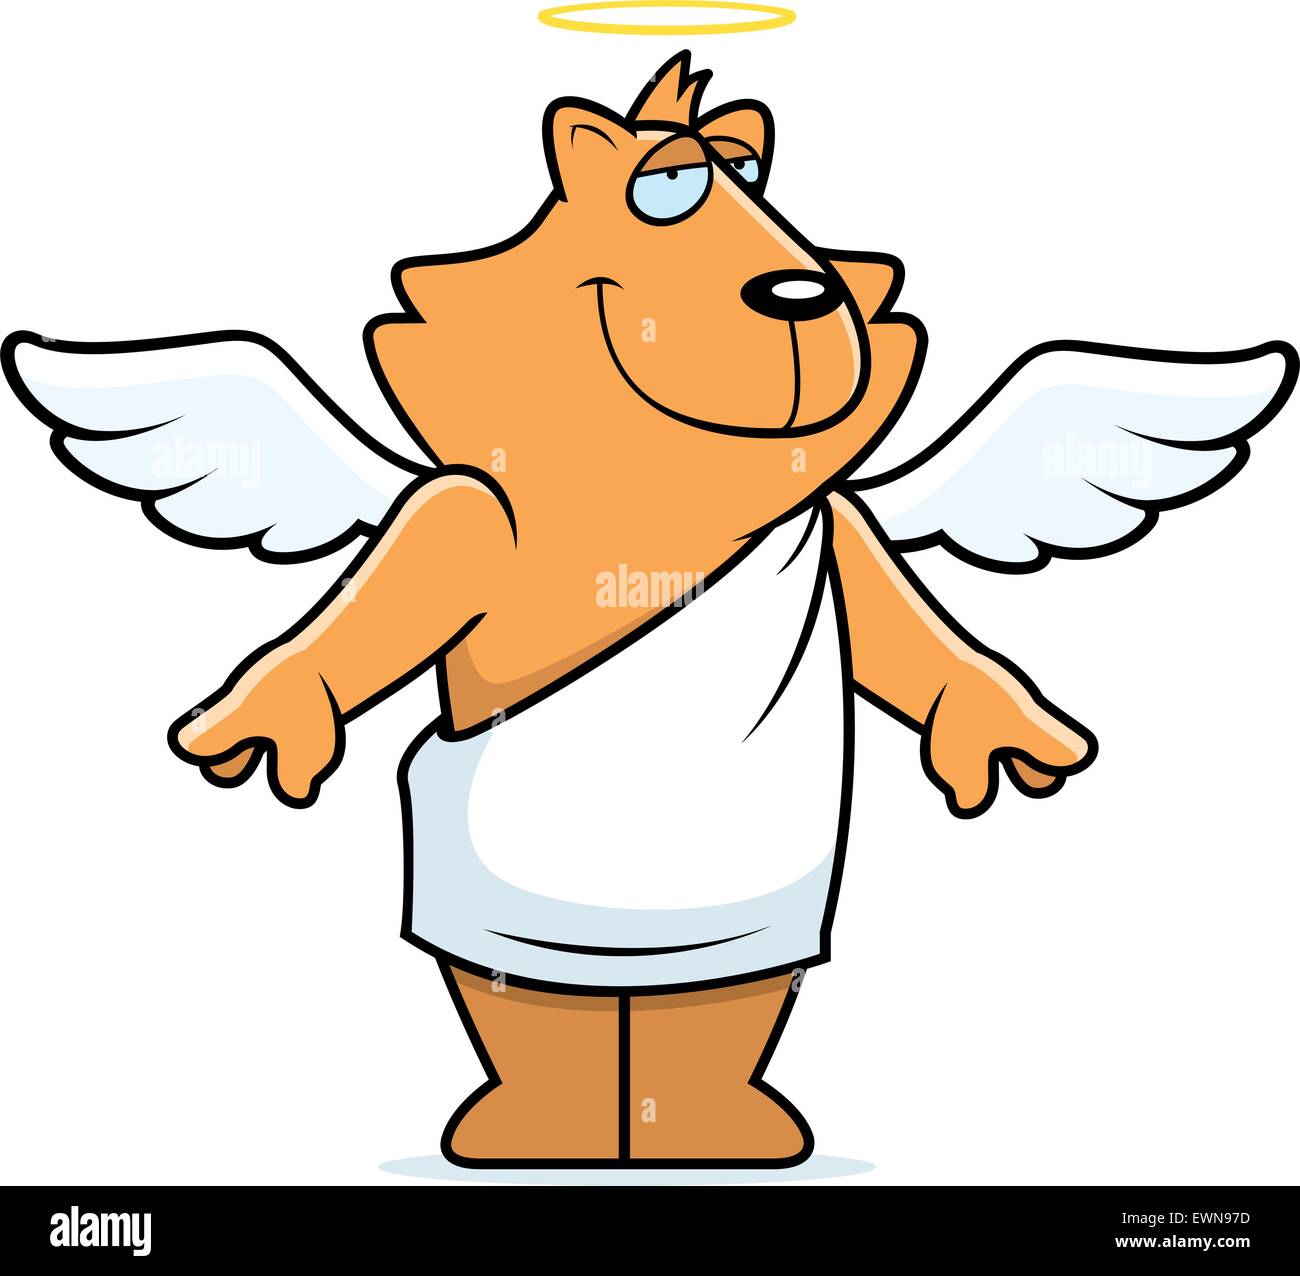 A cartoon cat with angel wings and halo. Stock Vector